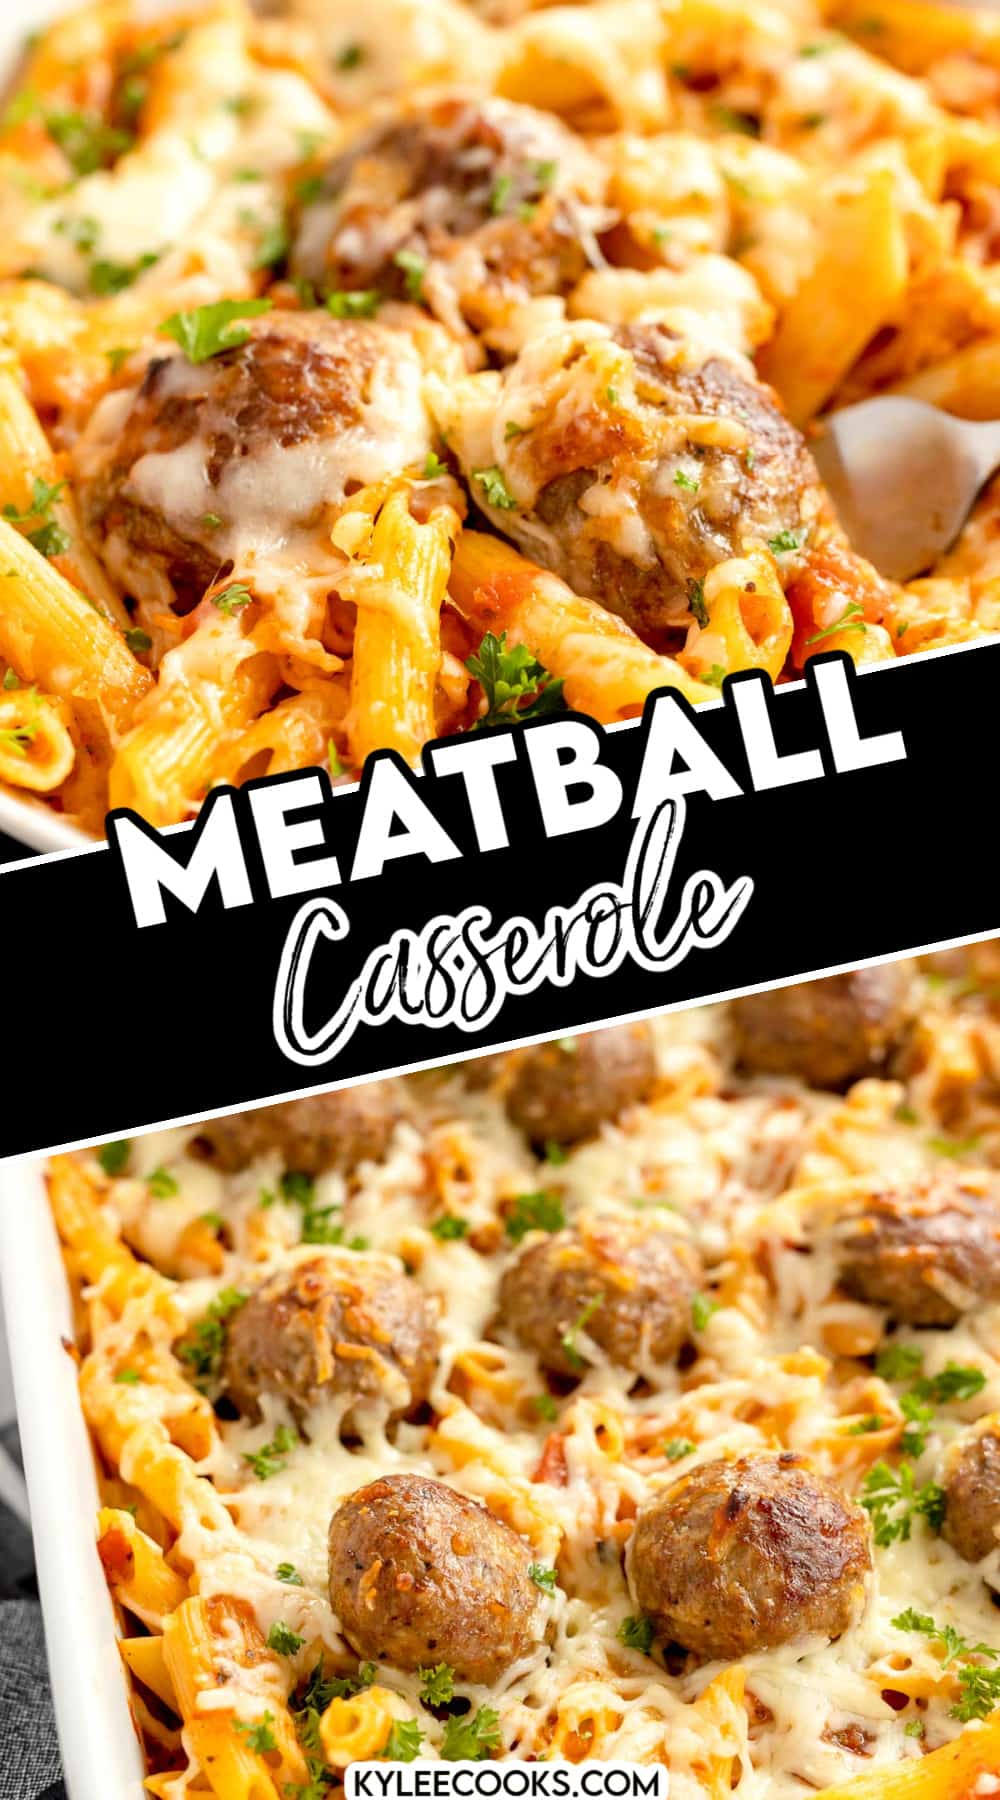 meatball casserole with ingredient list and images, plus recipe name overlaid in text.